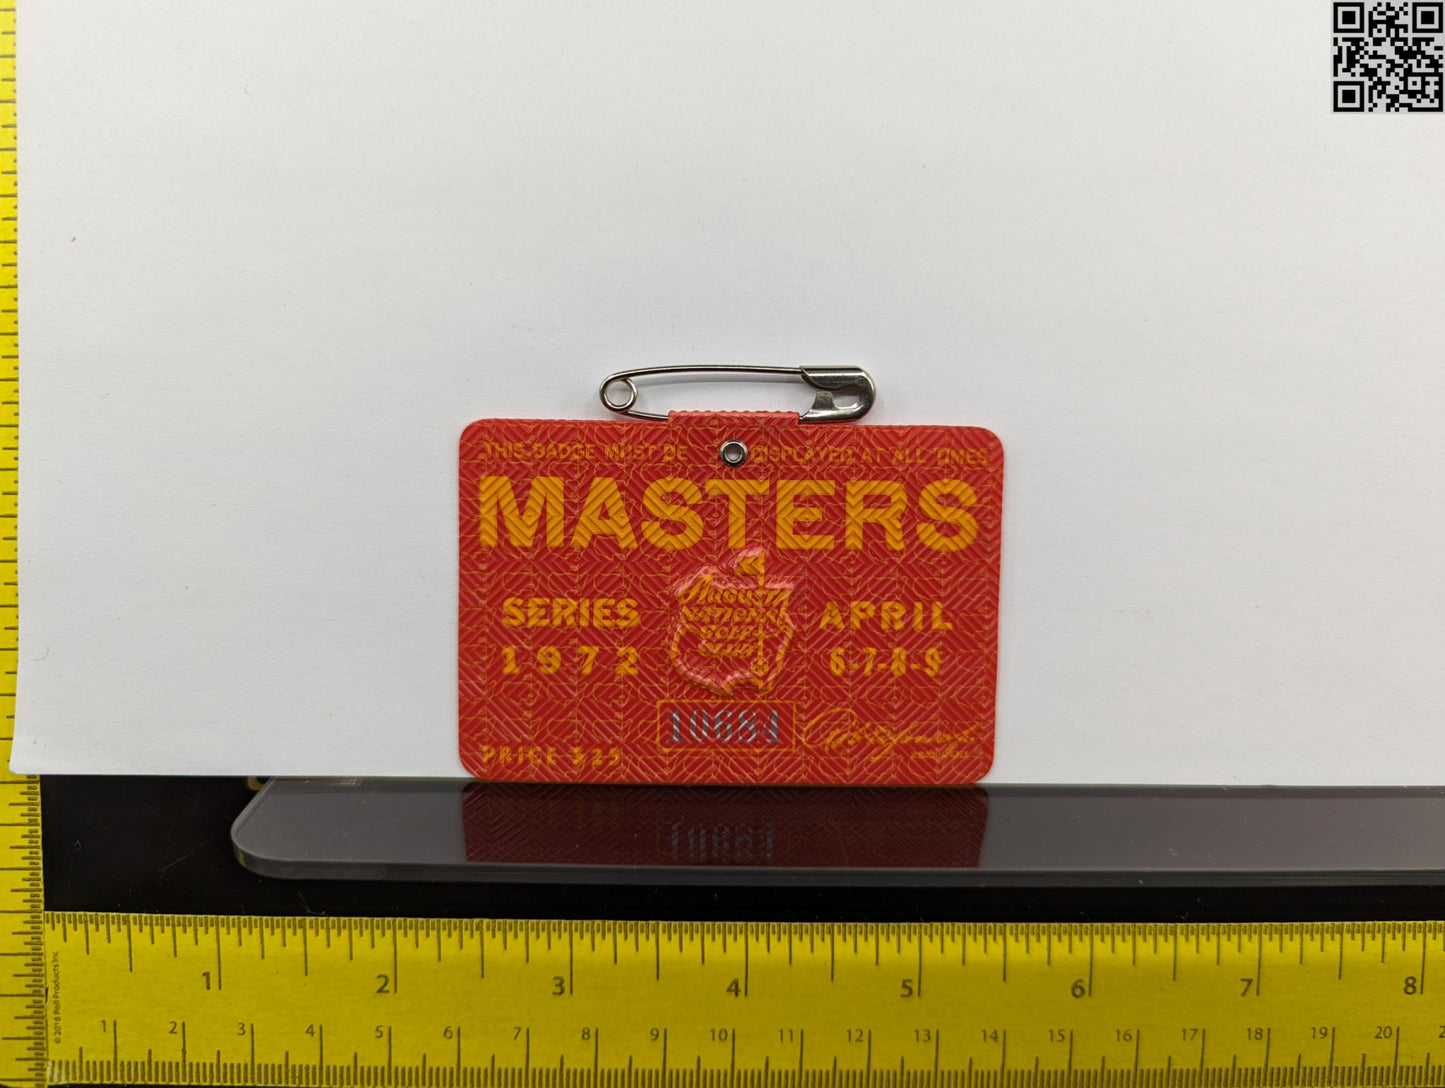 1972 Masters Tournament Series Badge - Augusta National Golf Club - Jack Nicklaus Win